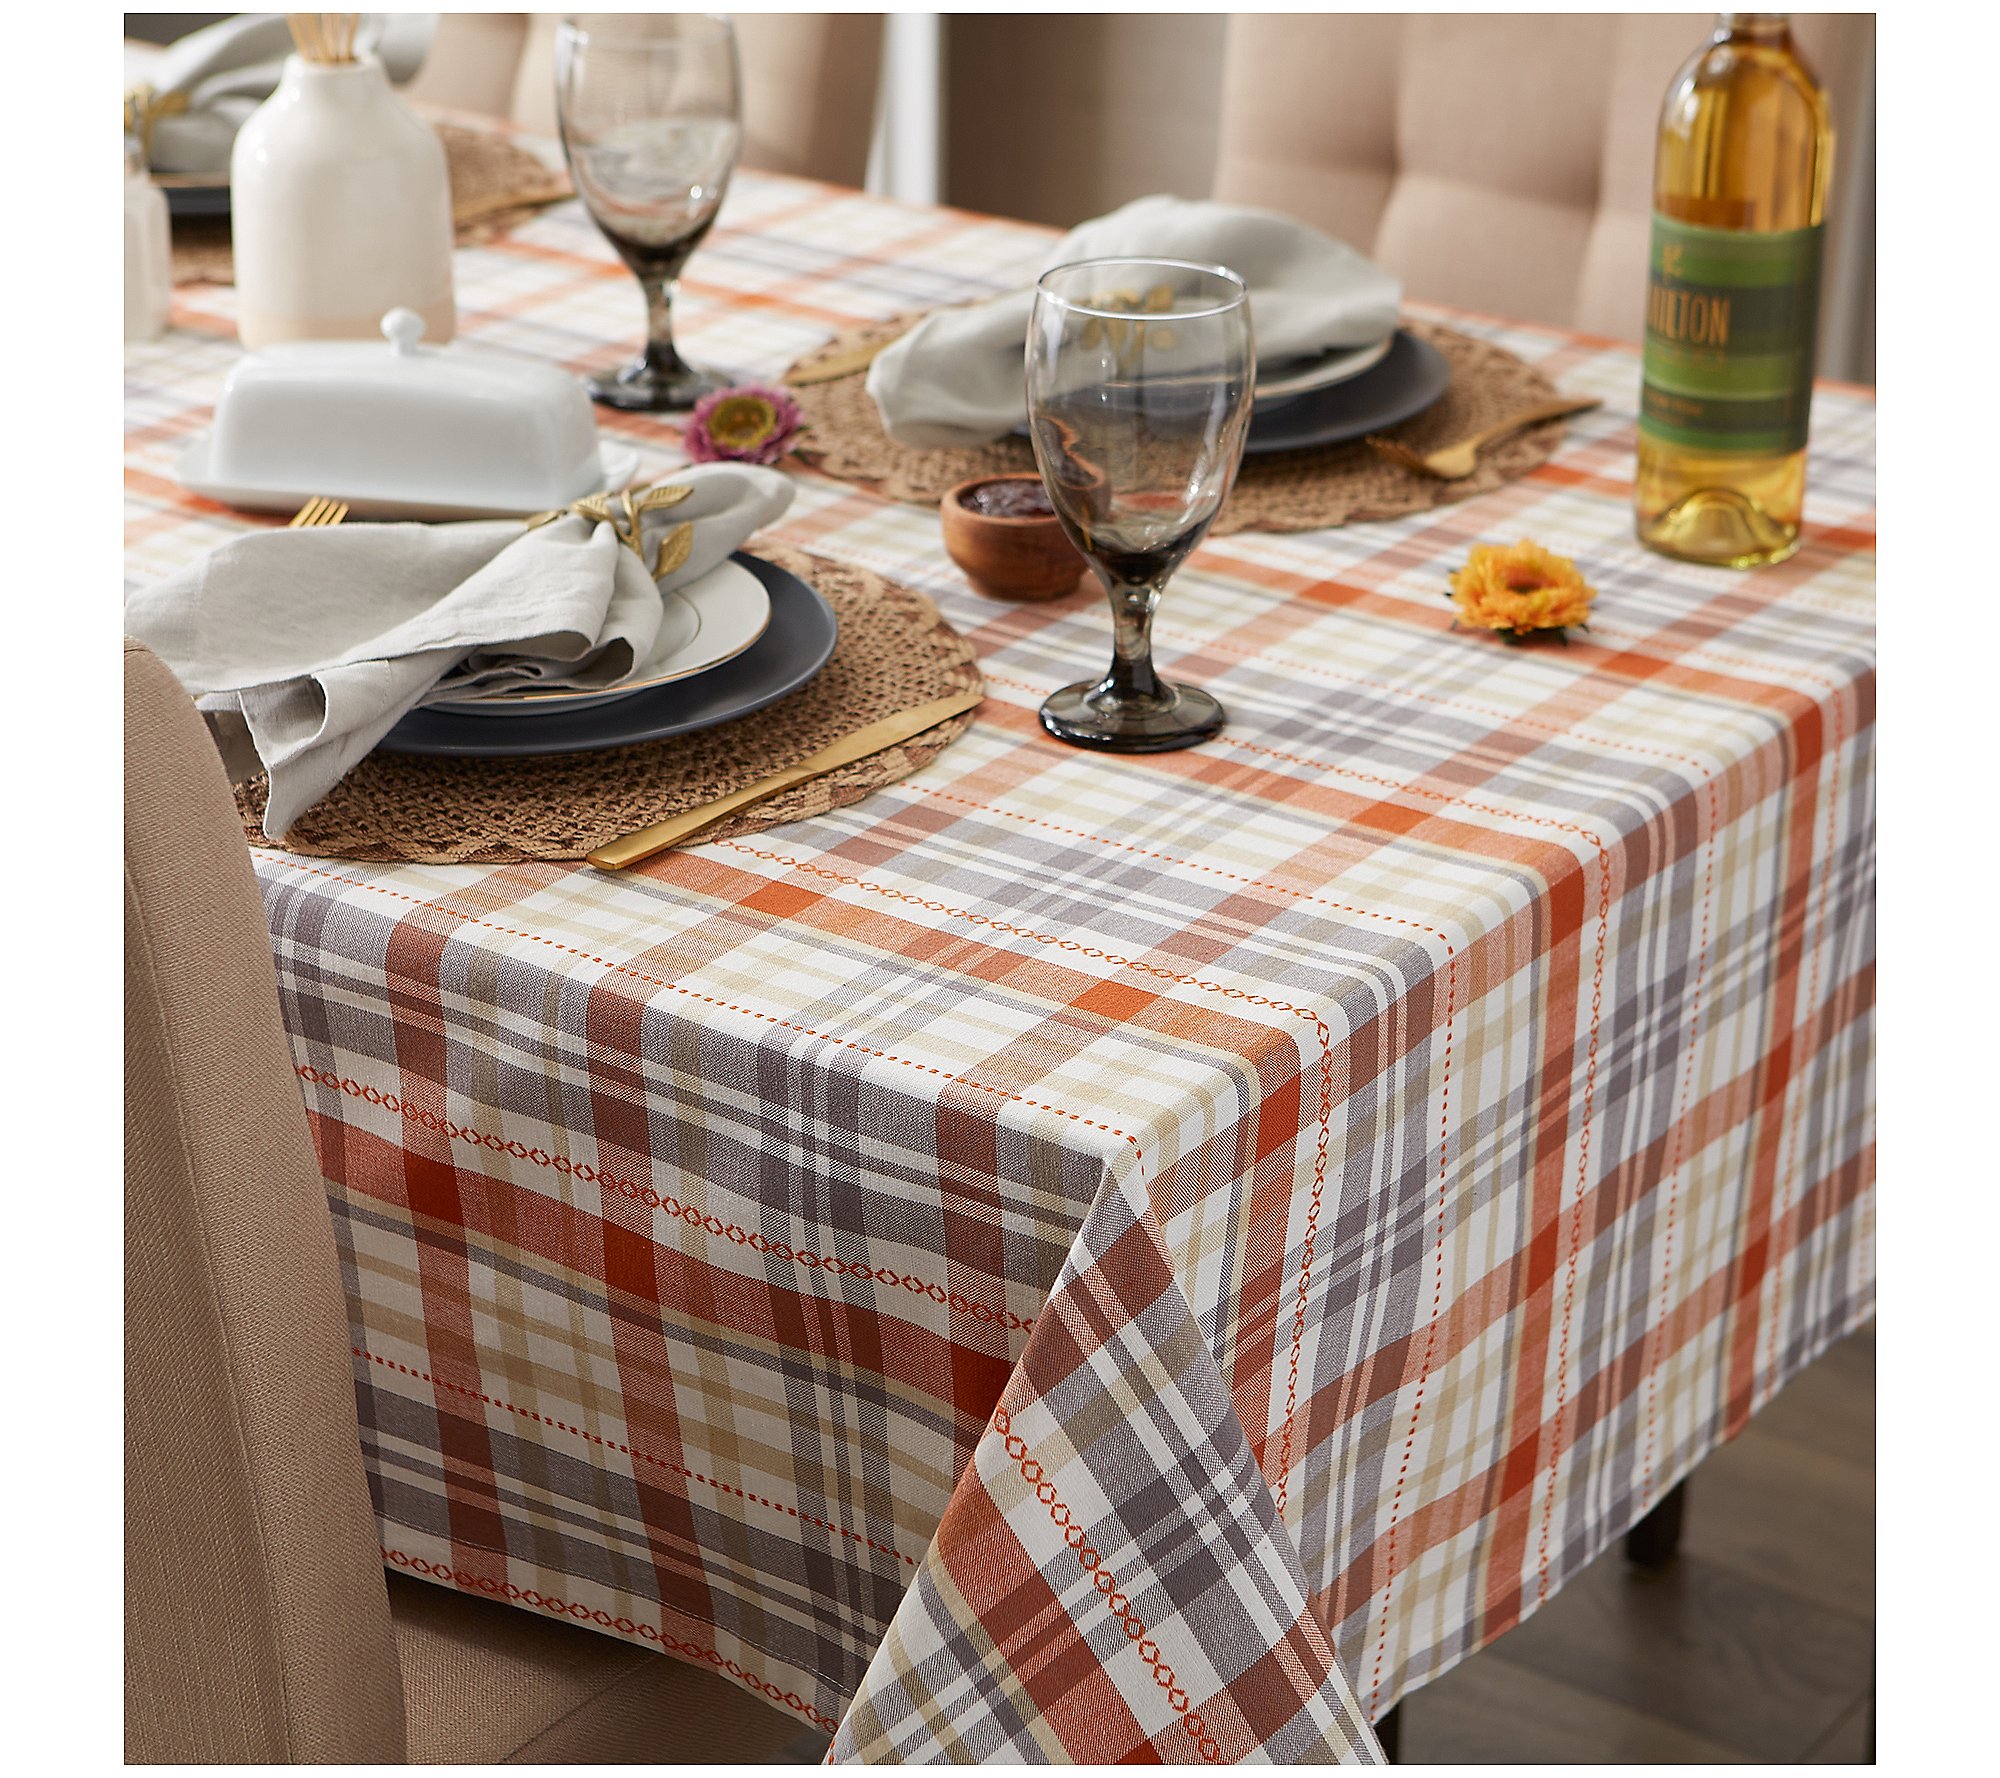 Design Imports Autumn Afternoon Plaid Tablecloth 52x52